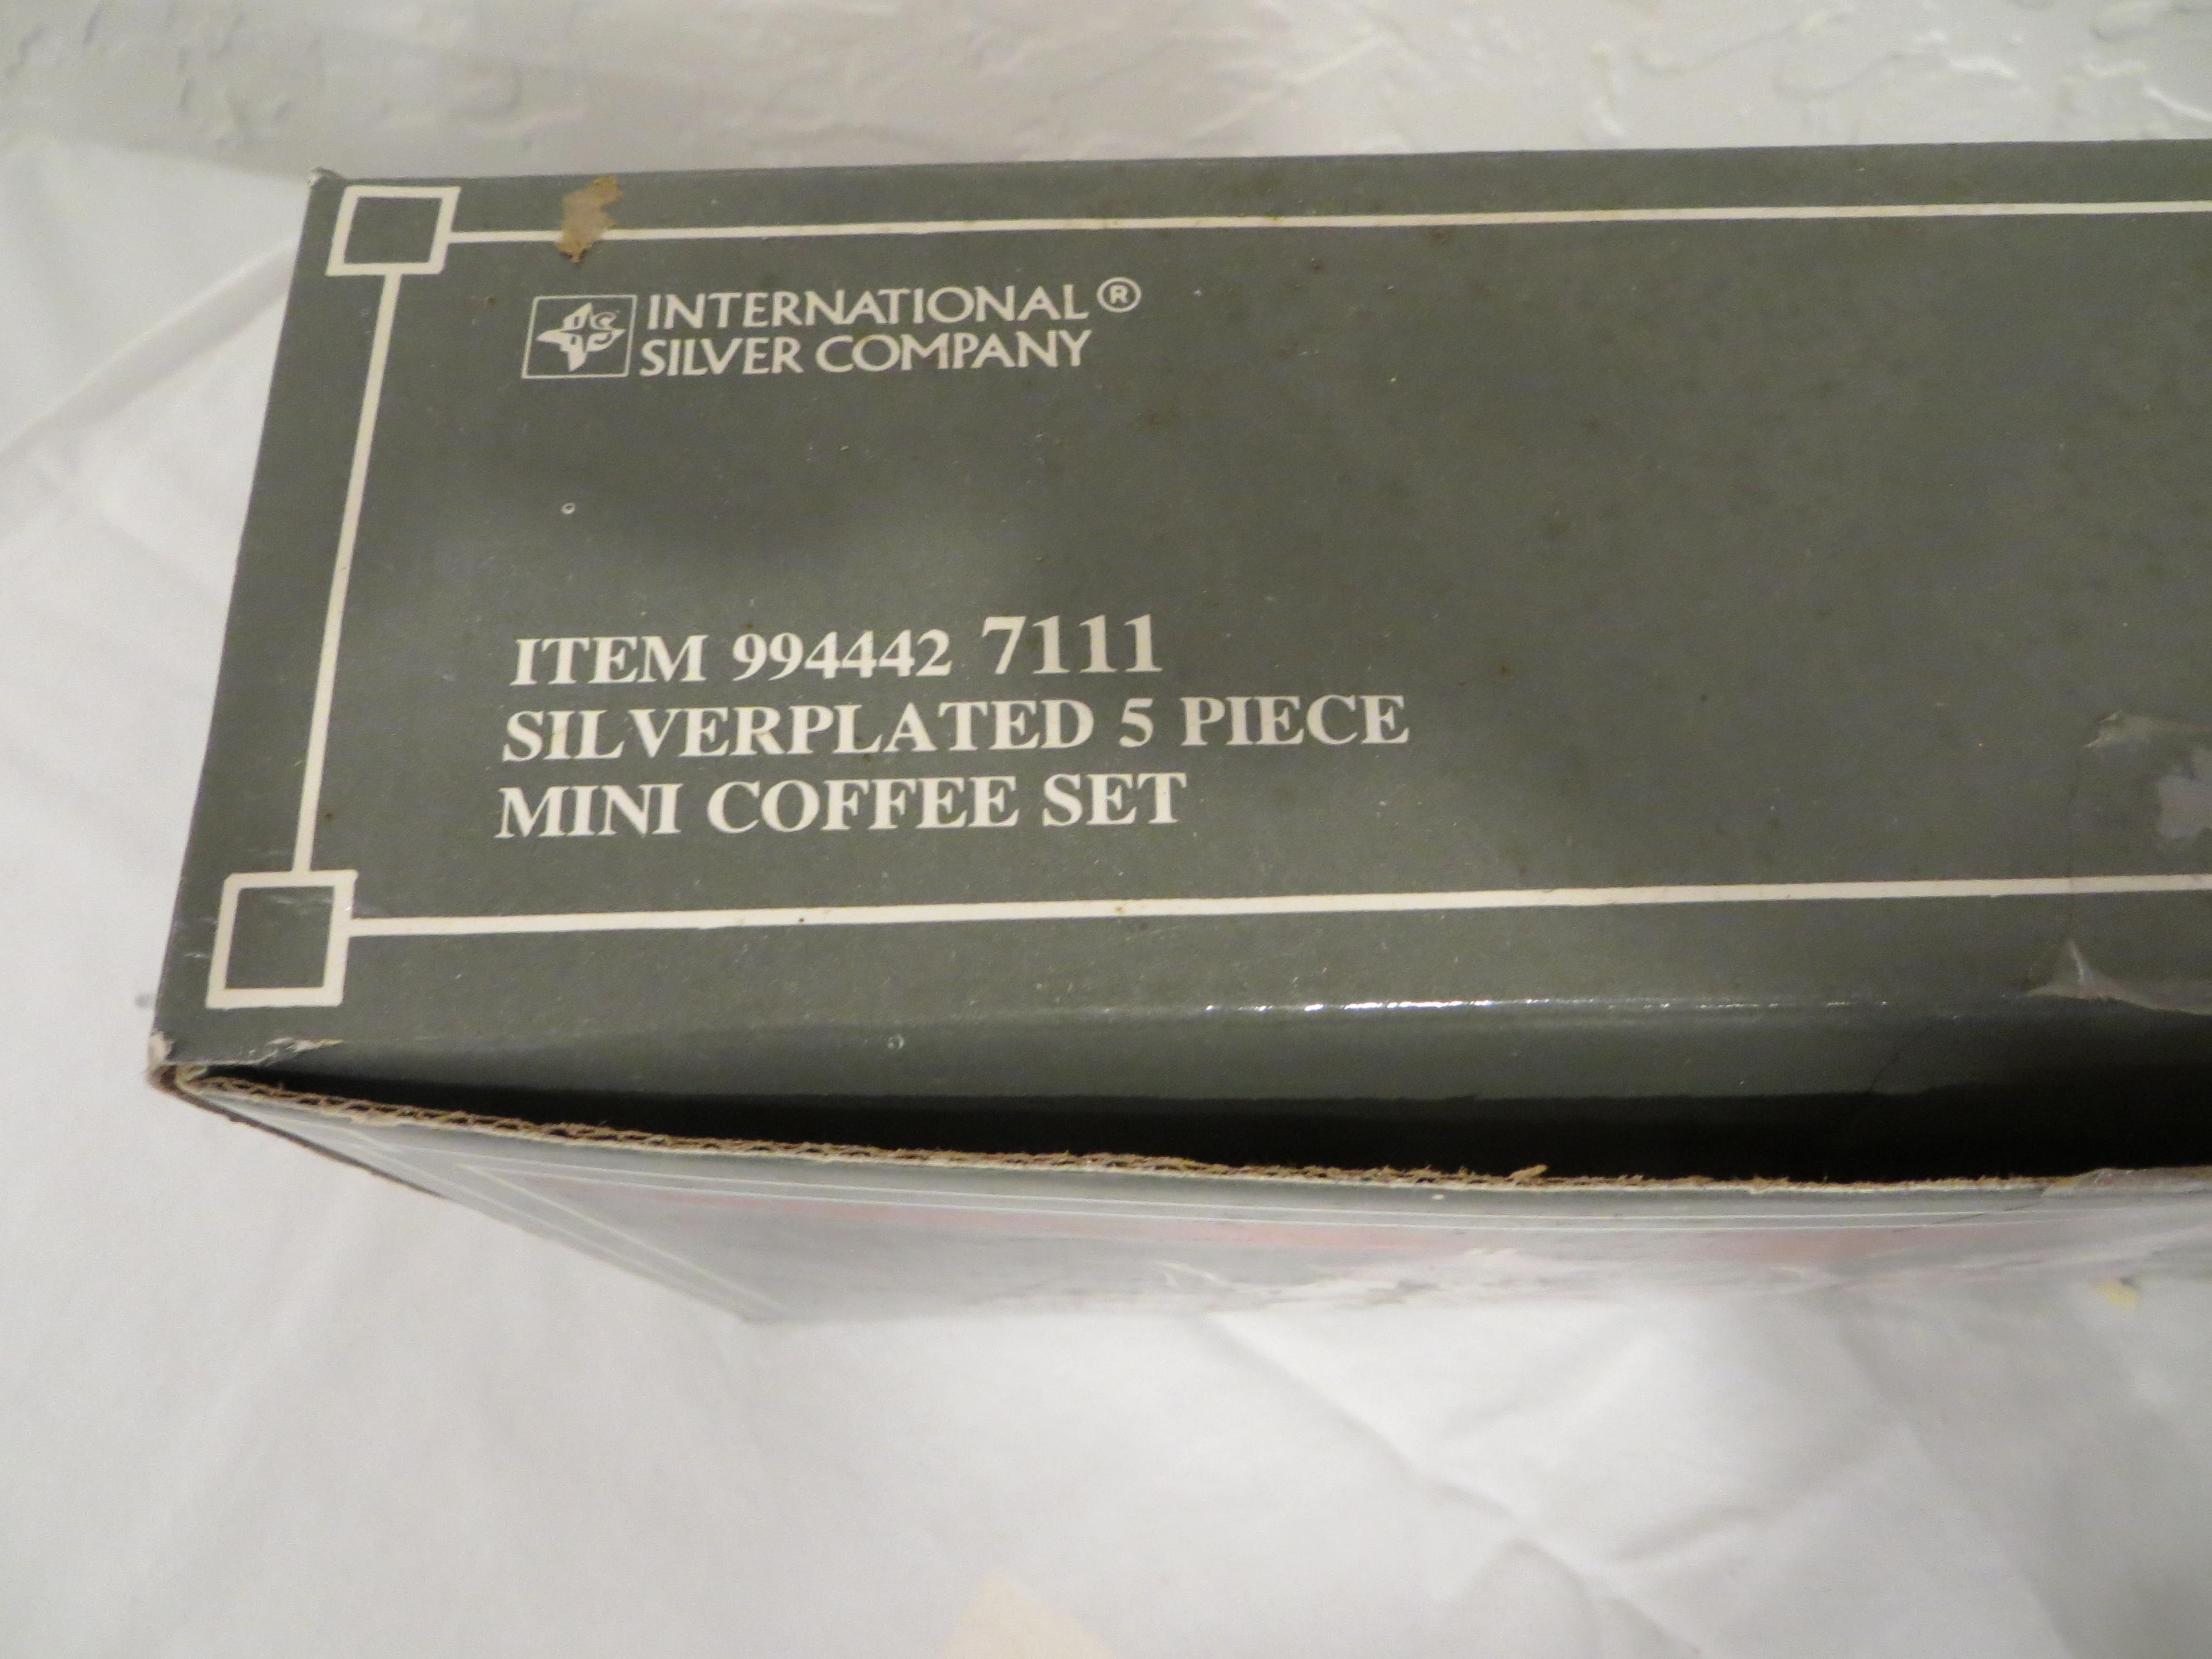 2 International Silver Co Silver Plated Coffee set #994442 7111